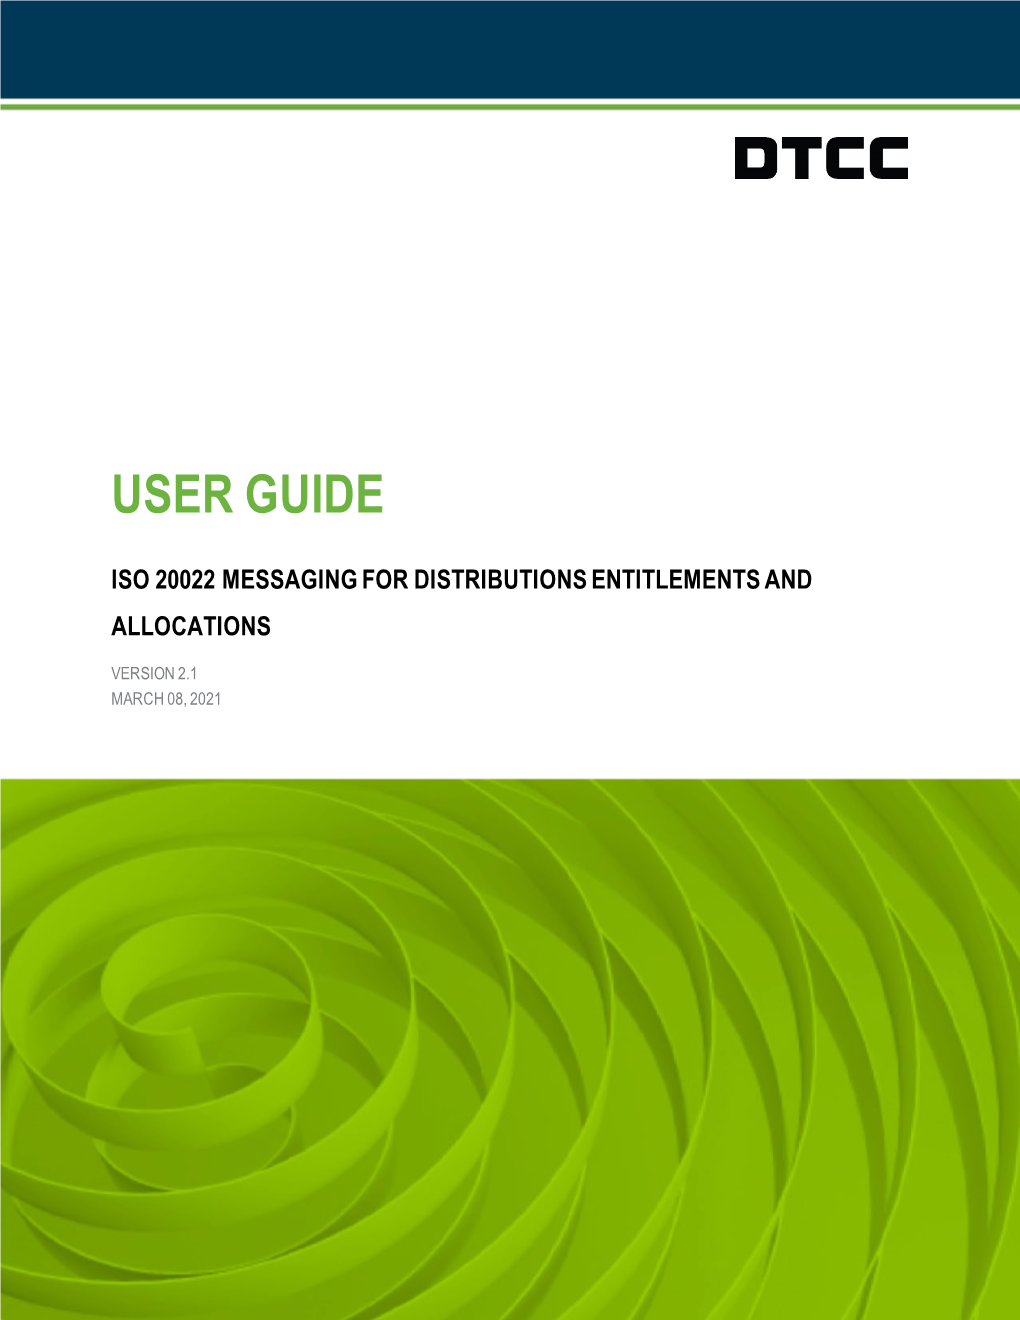 User Guide: ISO 20022 Messaging for Distributions Entitlements and Allocations